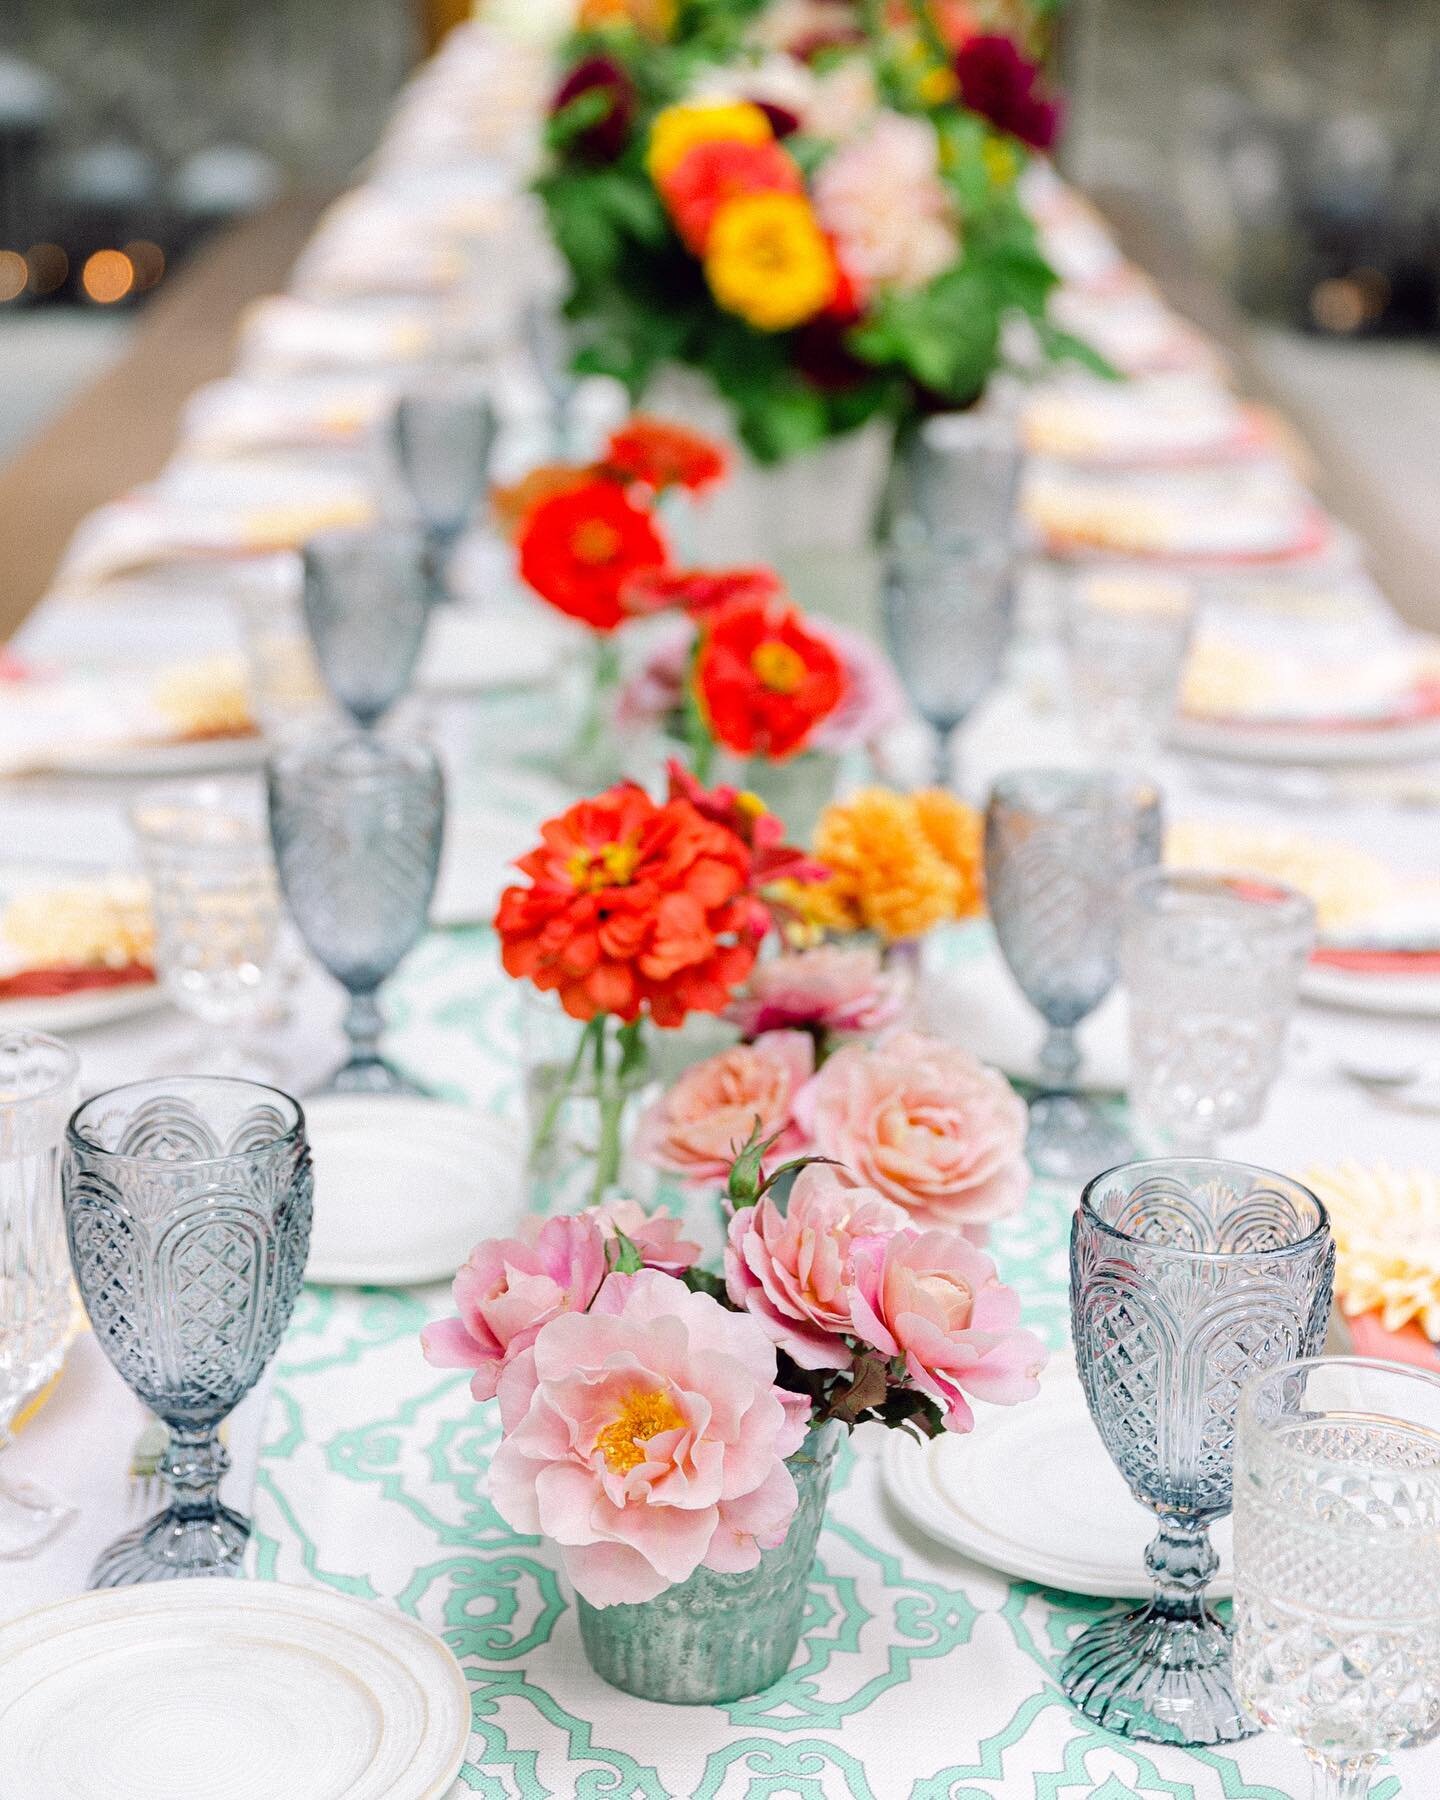 A beautiful rehearsal dinner table to kick off an incredible weekend. 
.
.
.
.
.
.
Design and Floral @valleyandco 
Venue @bellalunafarms 
Catering @tablecateringco 
Featured on @overthemoon 
#katieparraphotography #seattlephotographer #weddingphotogr